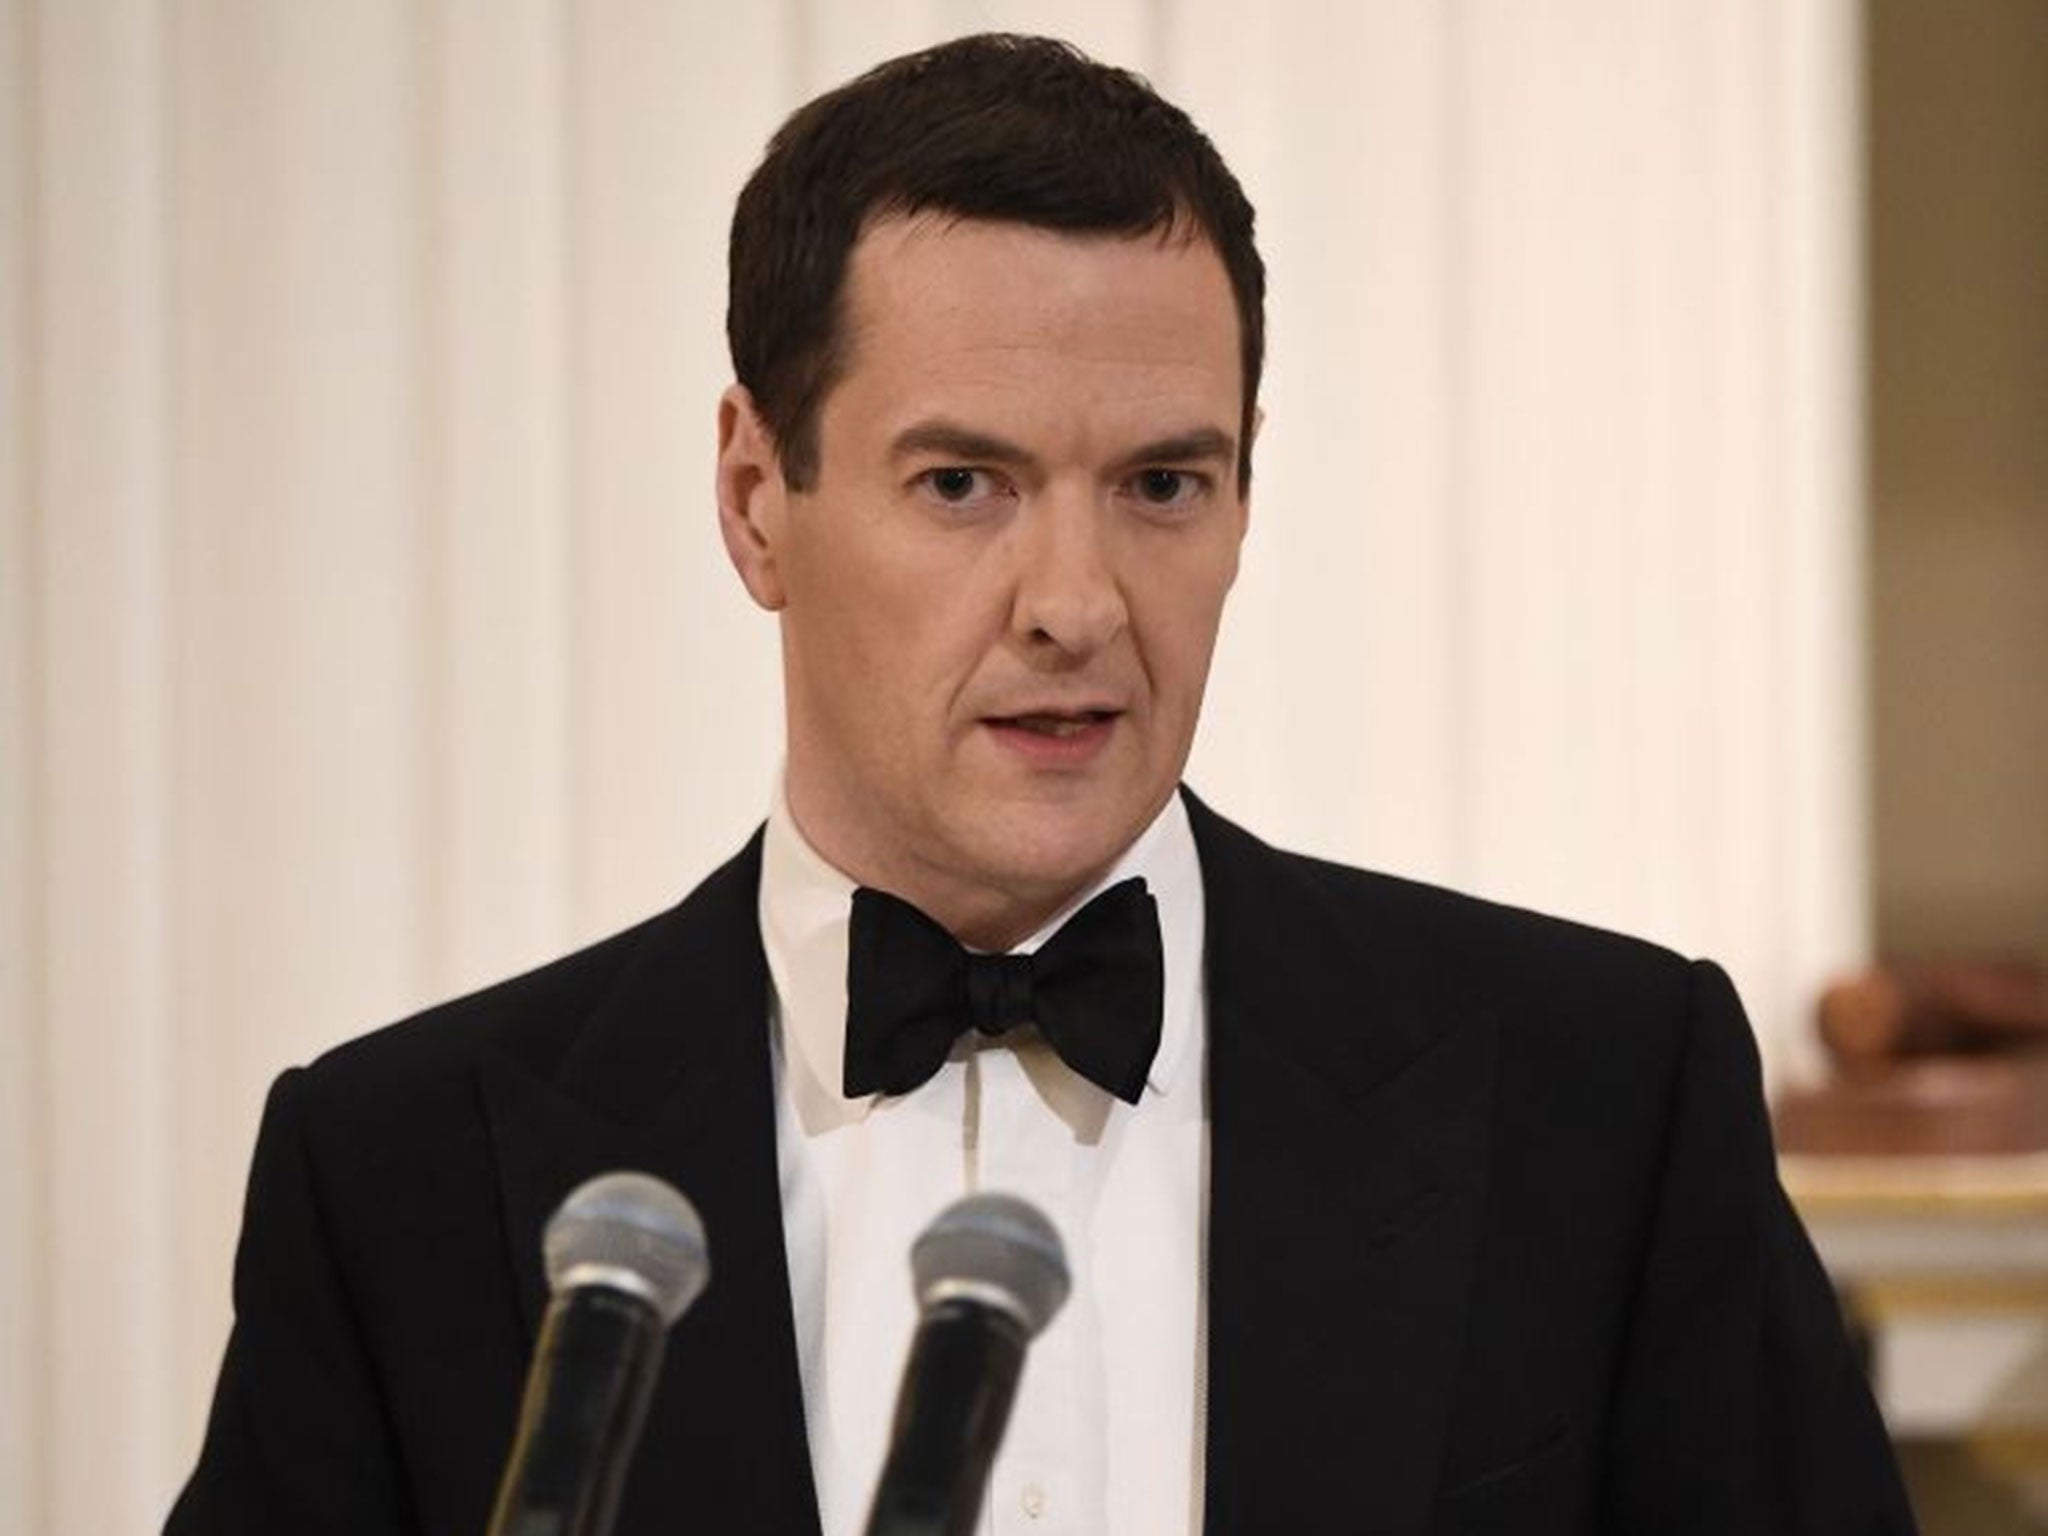 British Chancellor of the Exchequer George Osborne speaks during the Lord Mayor's Dinner to the Bankers and Merchants of the City of London at The Mansion House in London on June 10, 2015. 